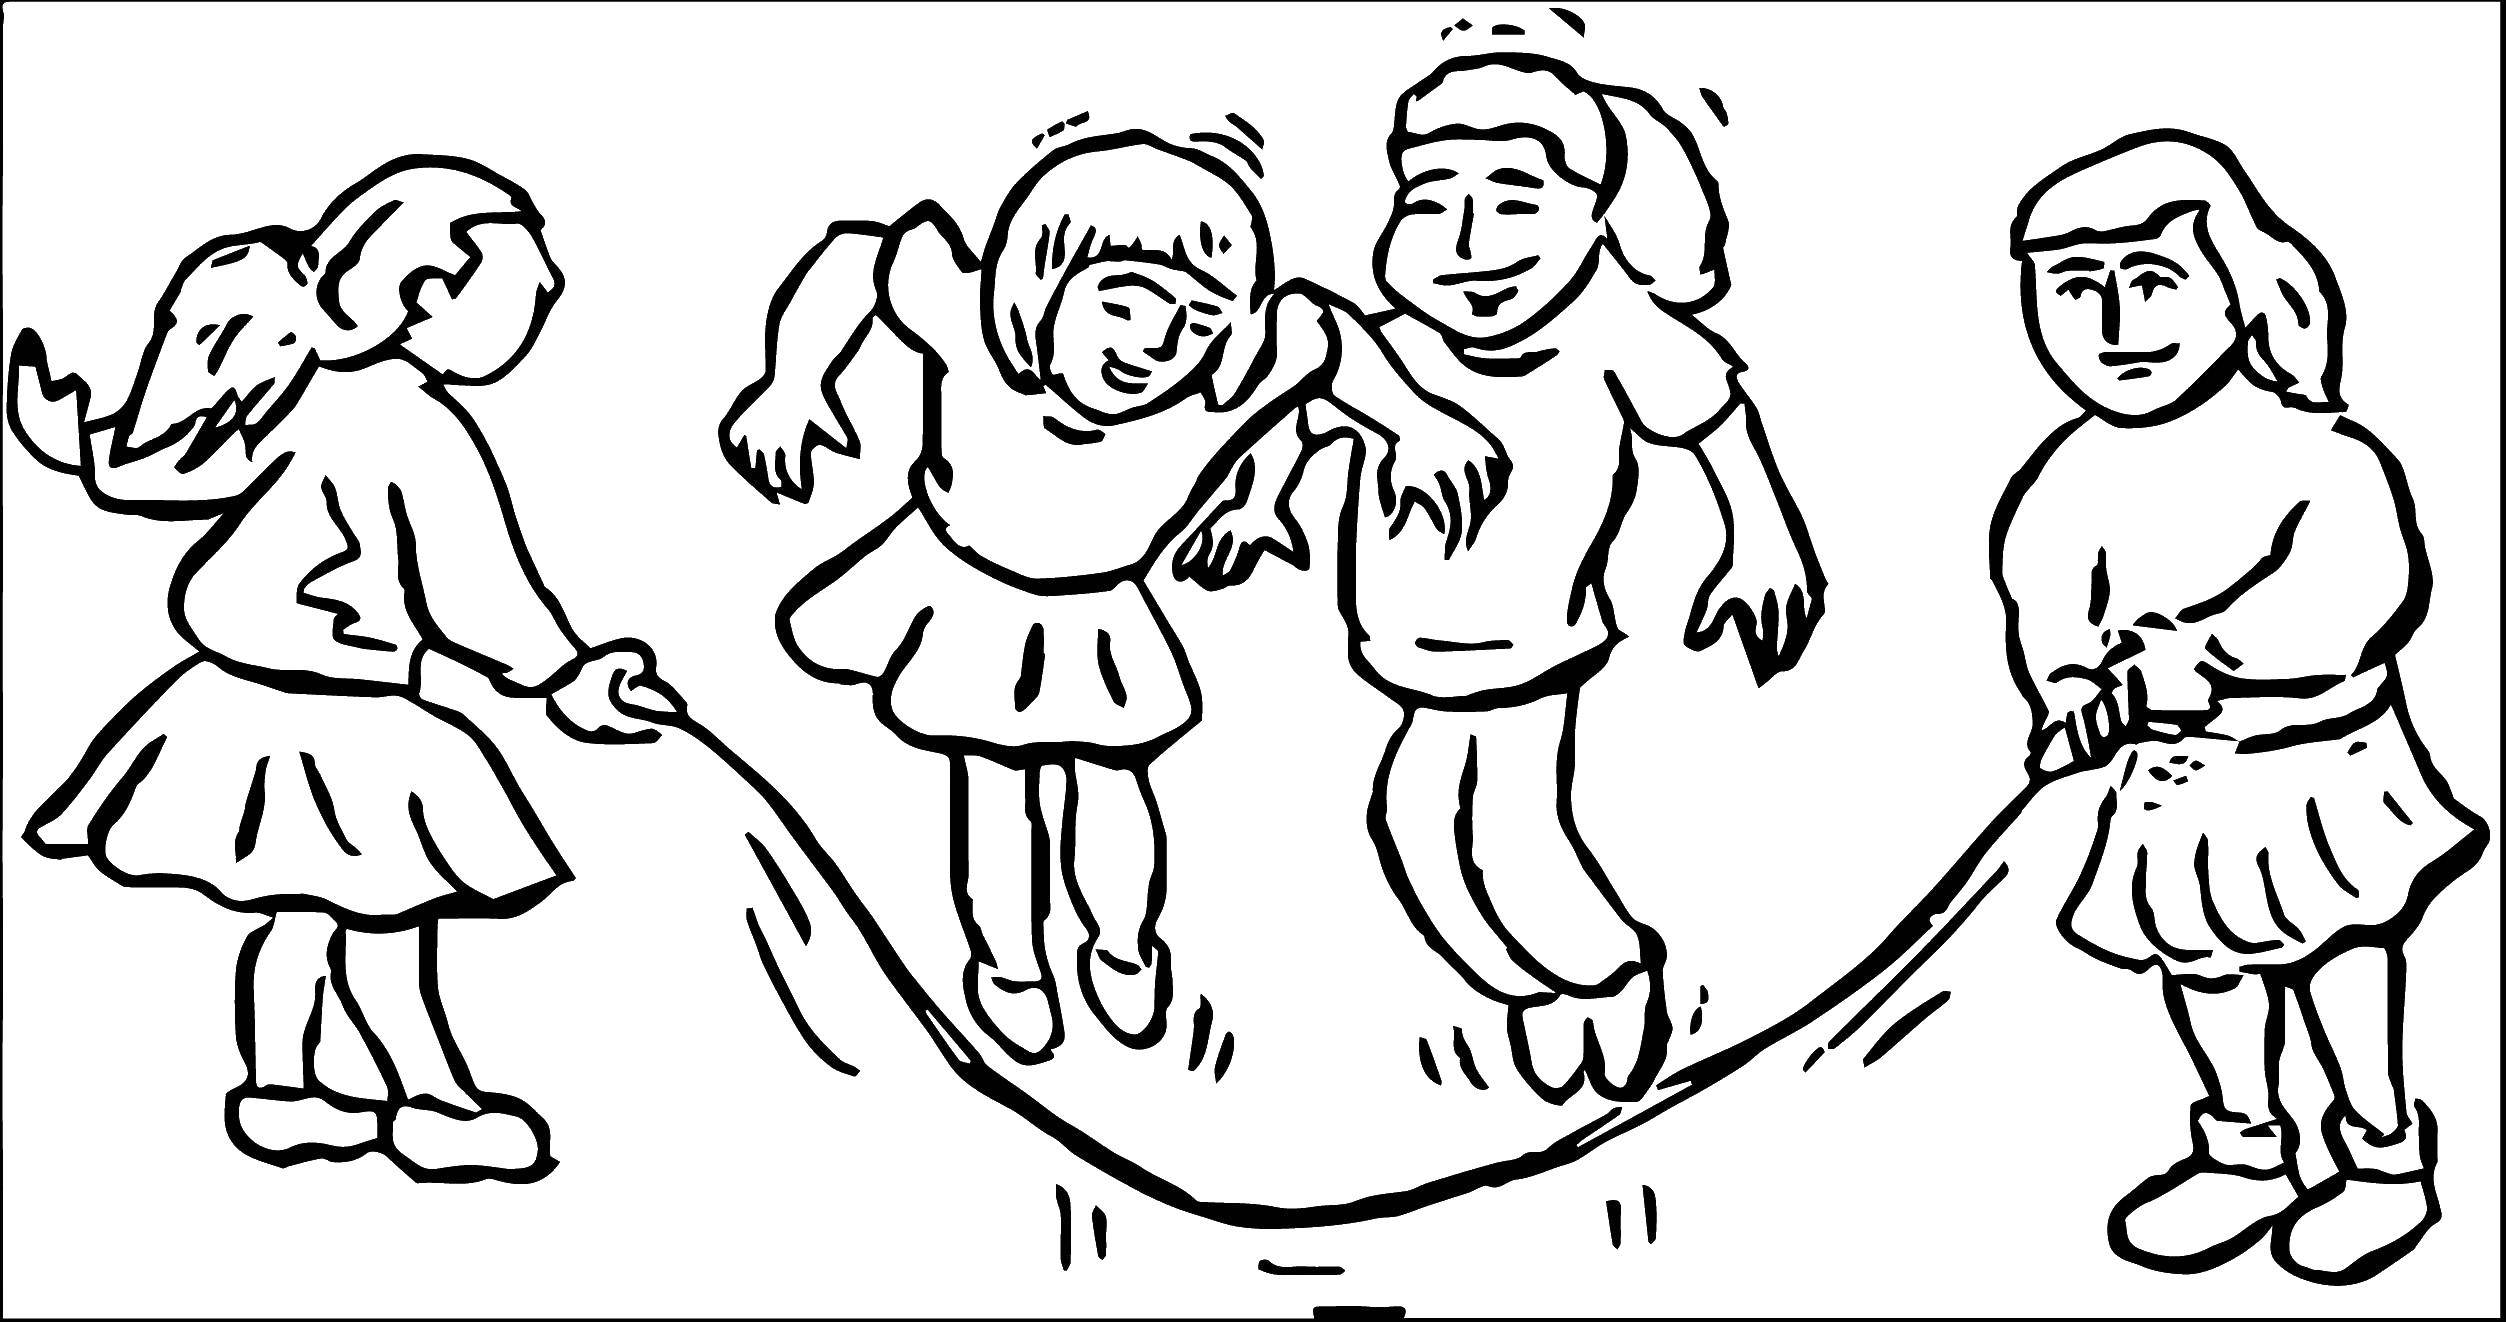 Coloring Children jumping rope. Category Children playing. Tags:  jump rope, boy, girl.